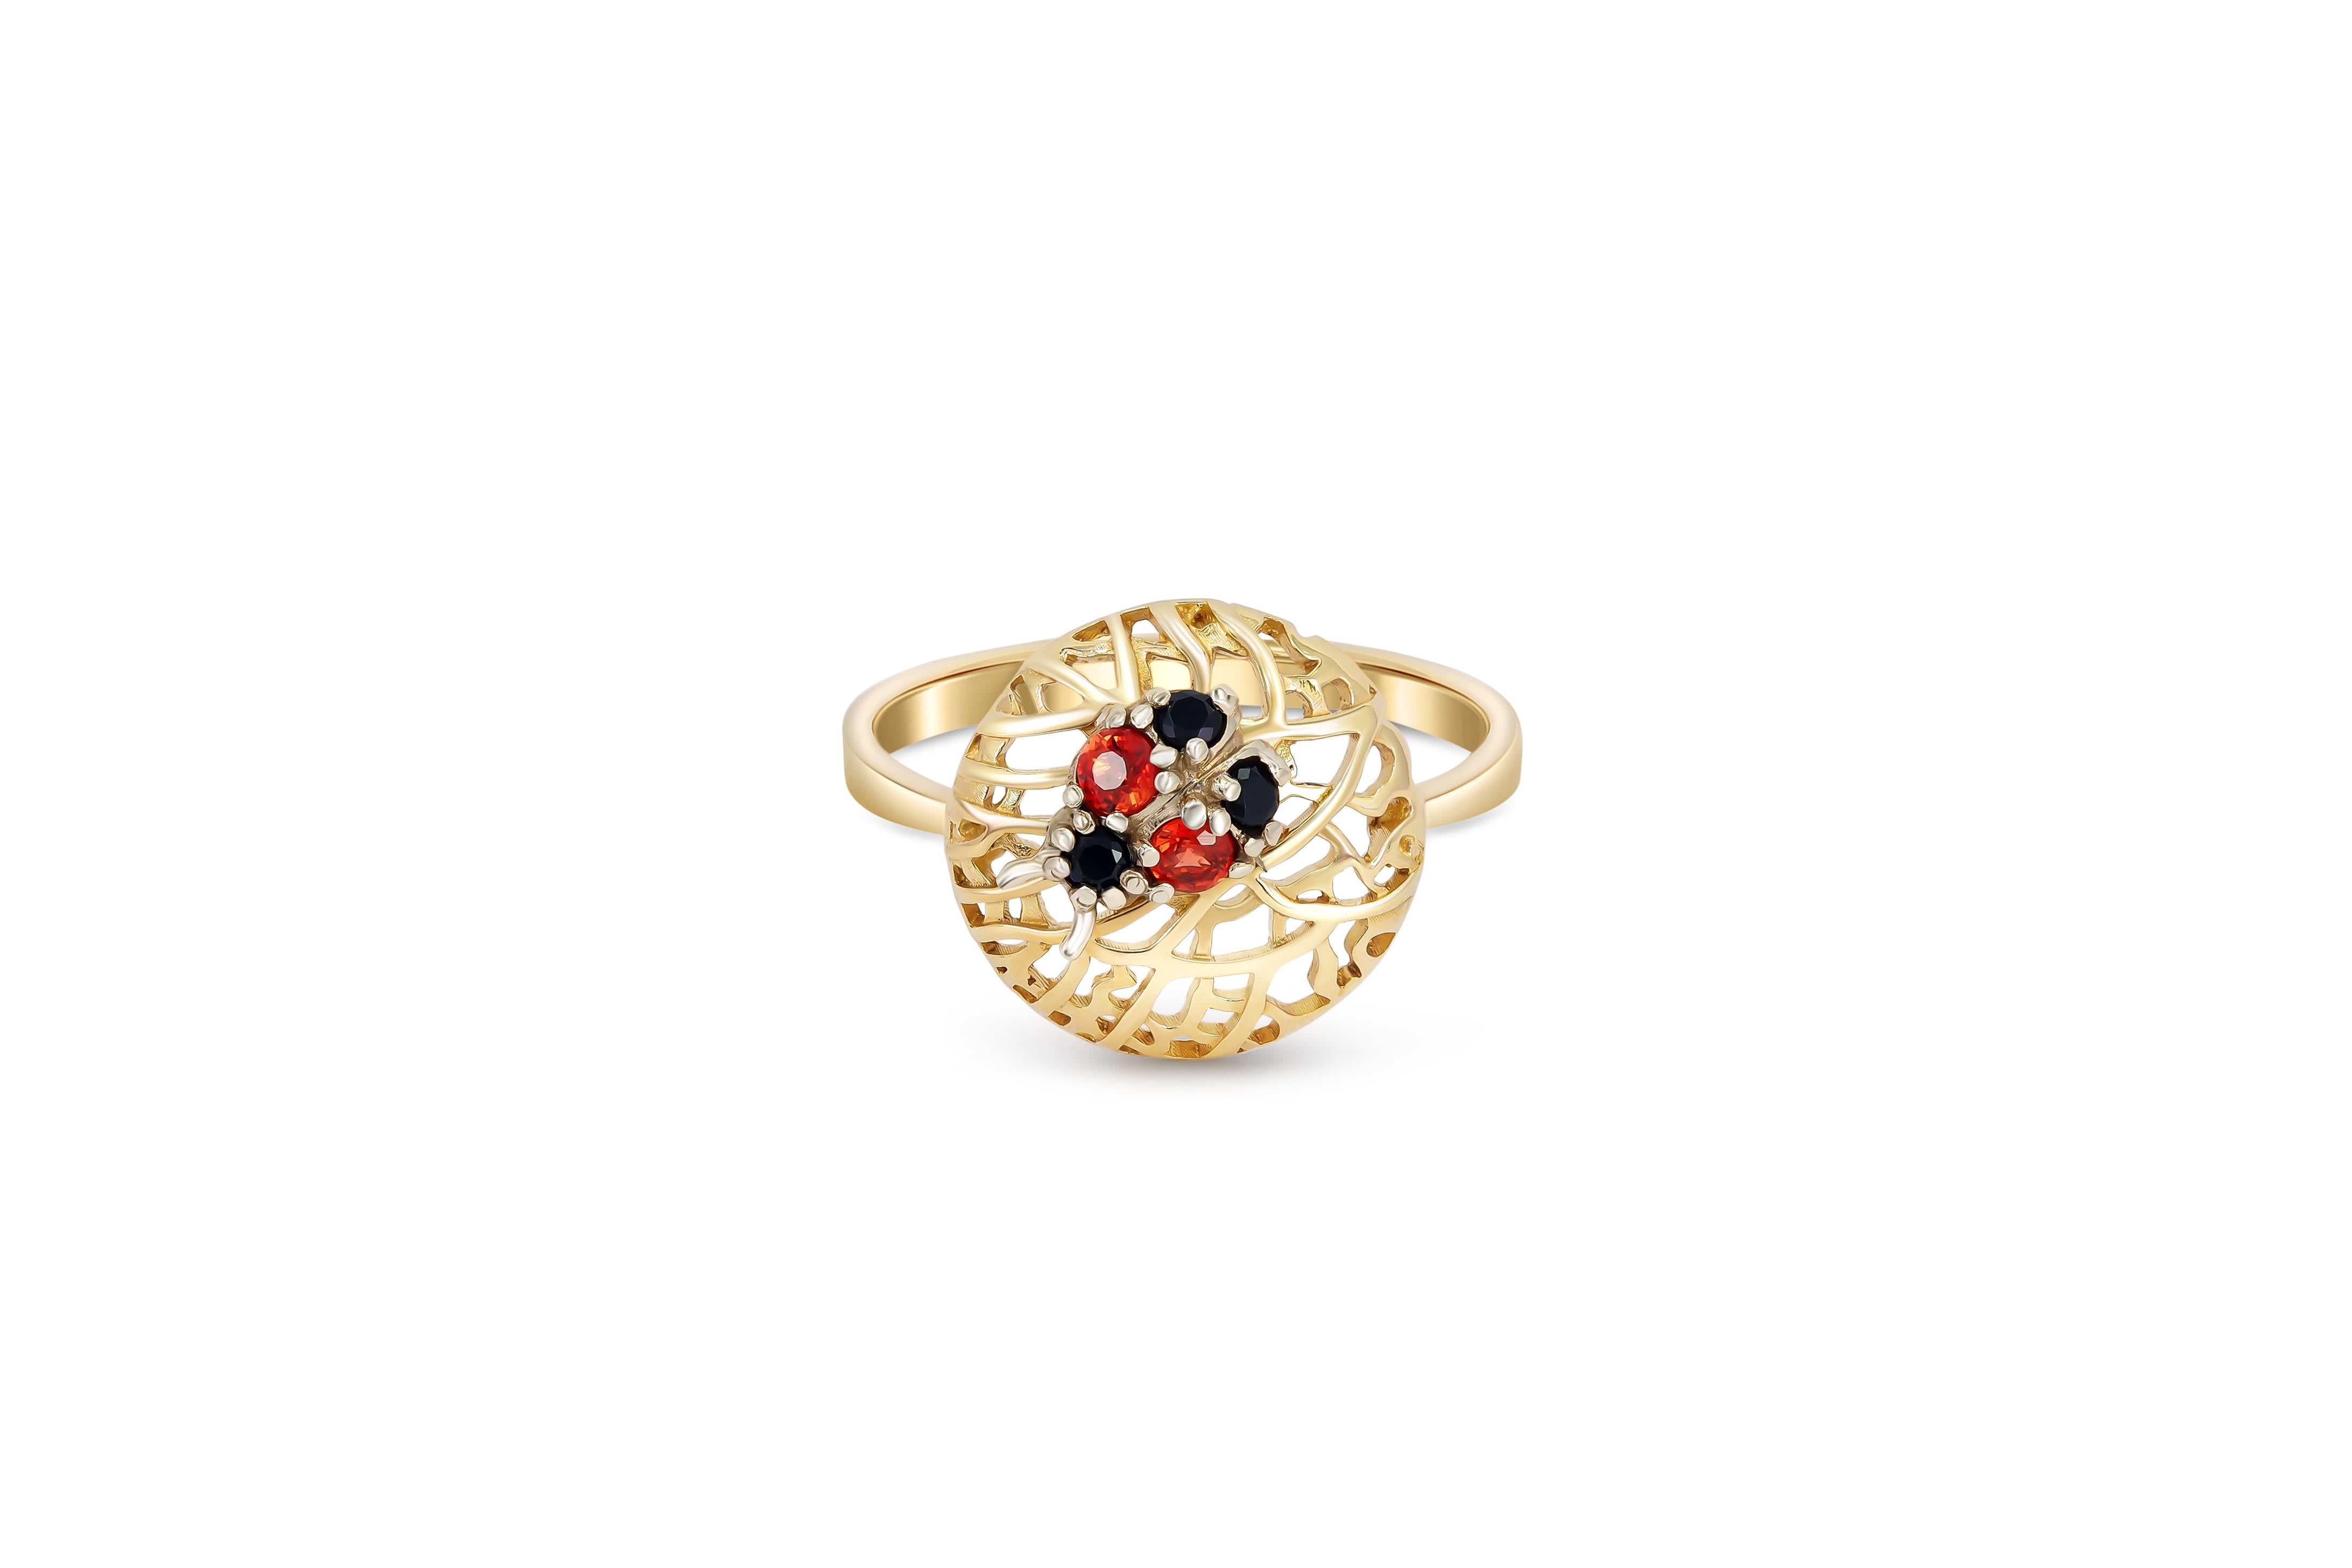 Ladybug ring with colored gemstones. 
Sapphire, spinel 14k gold ring. Nature inspired ring. Good Luck jewelry. Mother Day Gift.

Weight: 2.20 gr. depends from size.
Metal: 14k gold

Gemstones:
Sapphire: round shape, orange red, Si clarity, 2 piece